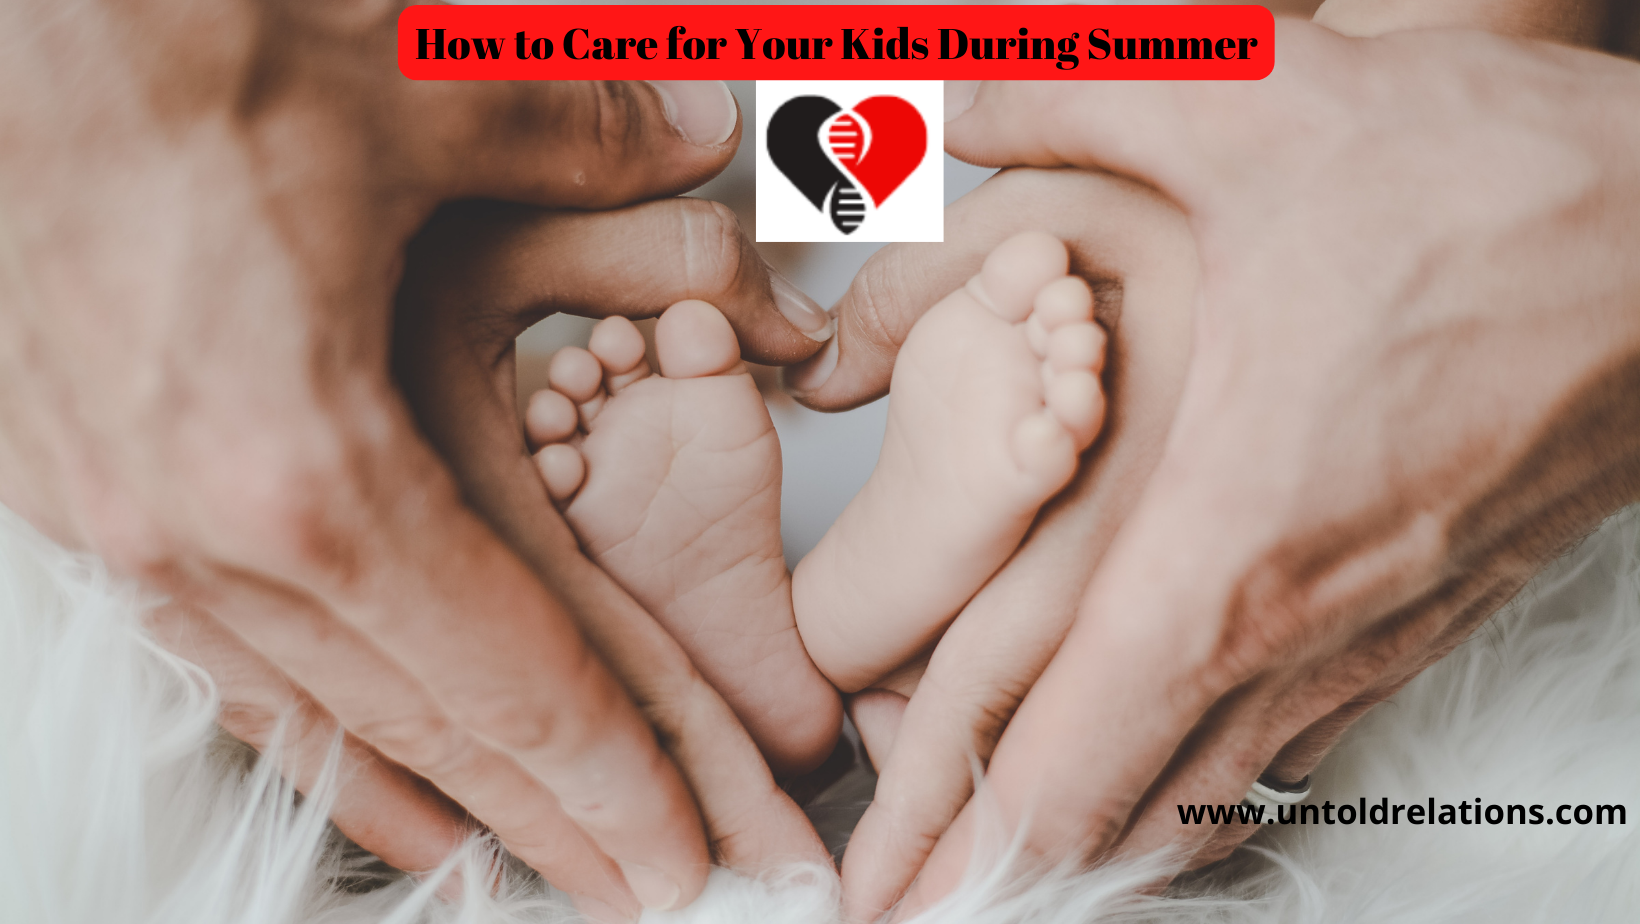 How to Care for Your Kids During Summer